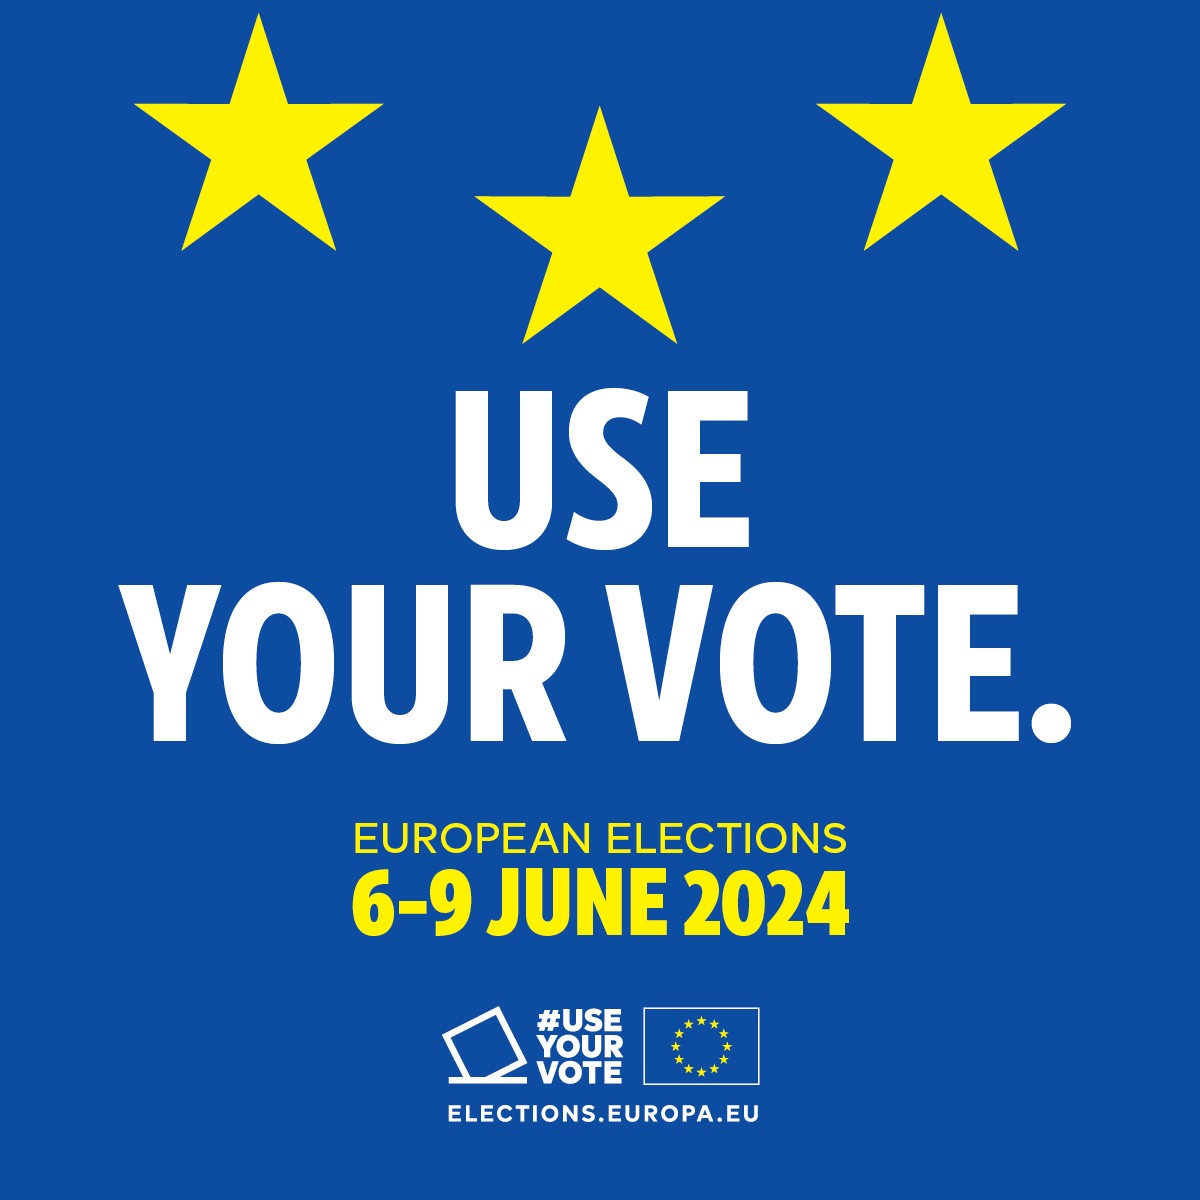 Preserving democracy is important - today more than ever.

The upcoming #EUElections2024🇪🇺 will play a crucial role in shaping the future of Europe.
It is your chance to #UseYourVote and make your voice heard 🗳 bit.ly/EUelections24